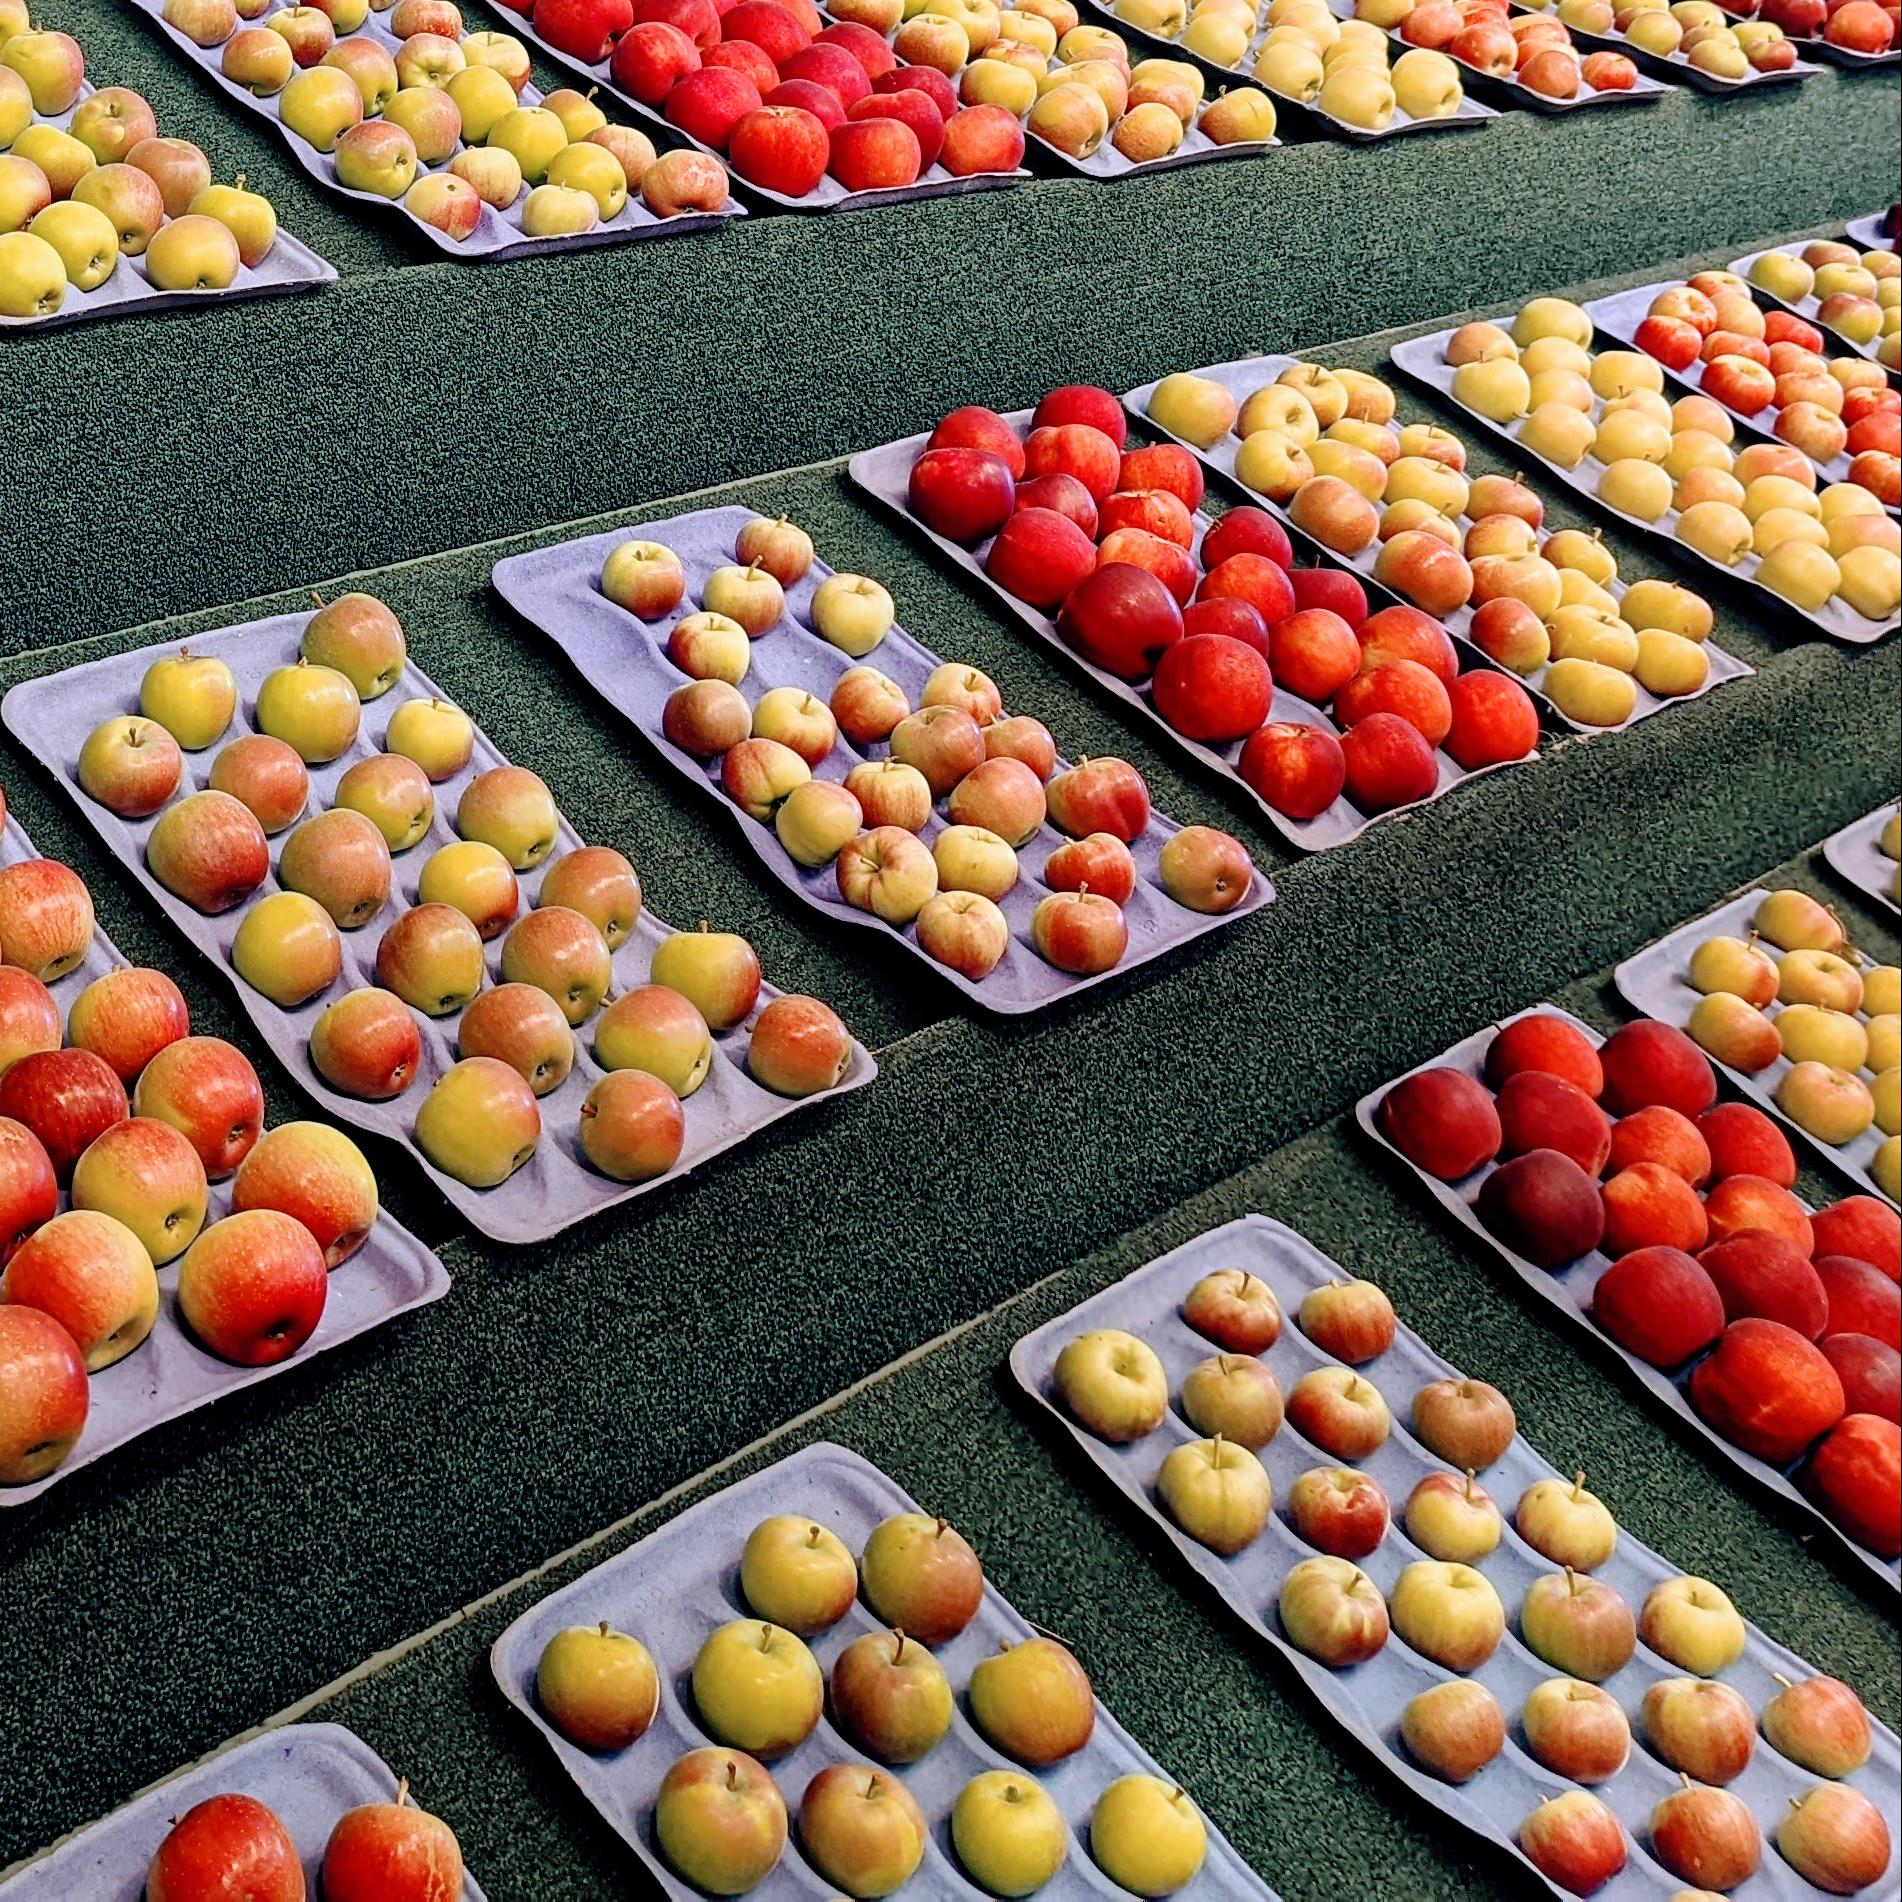 A photograph of apples on display at the Minnesota State Fair.